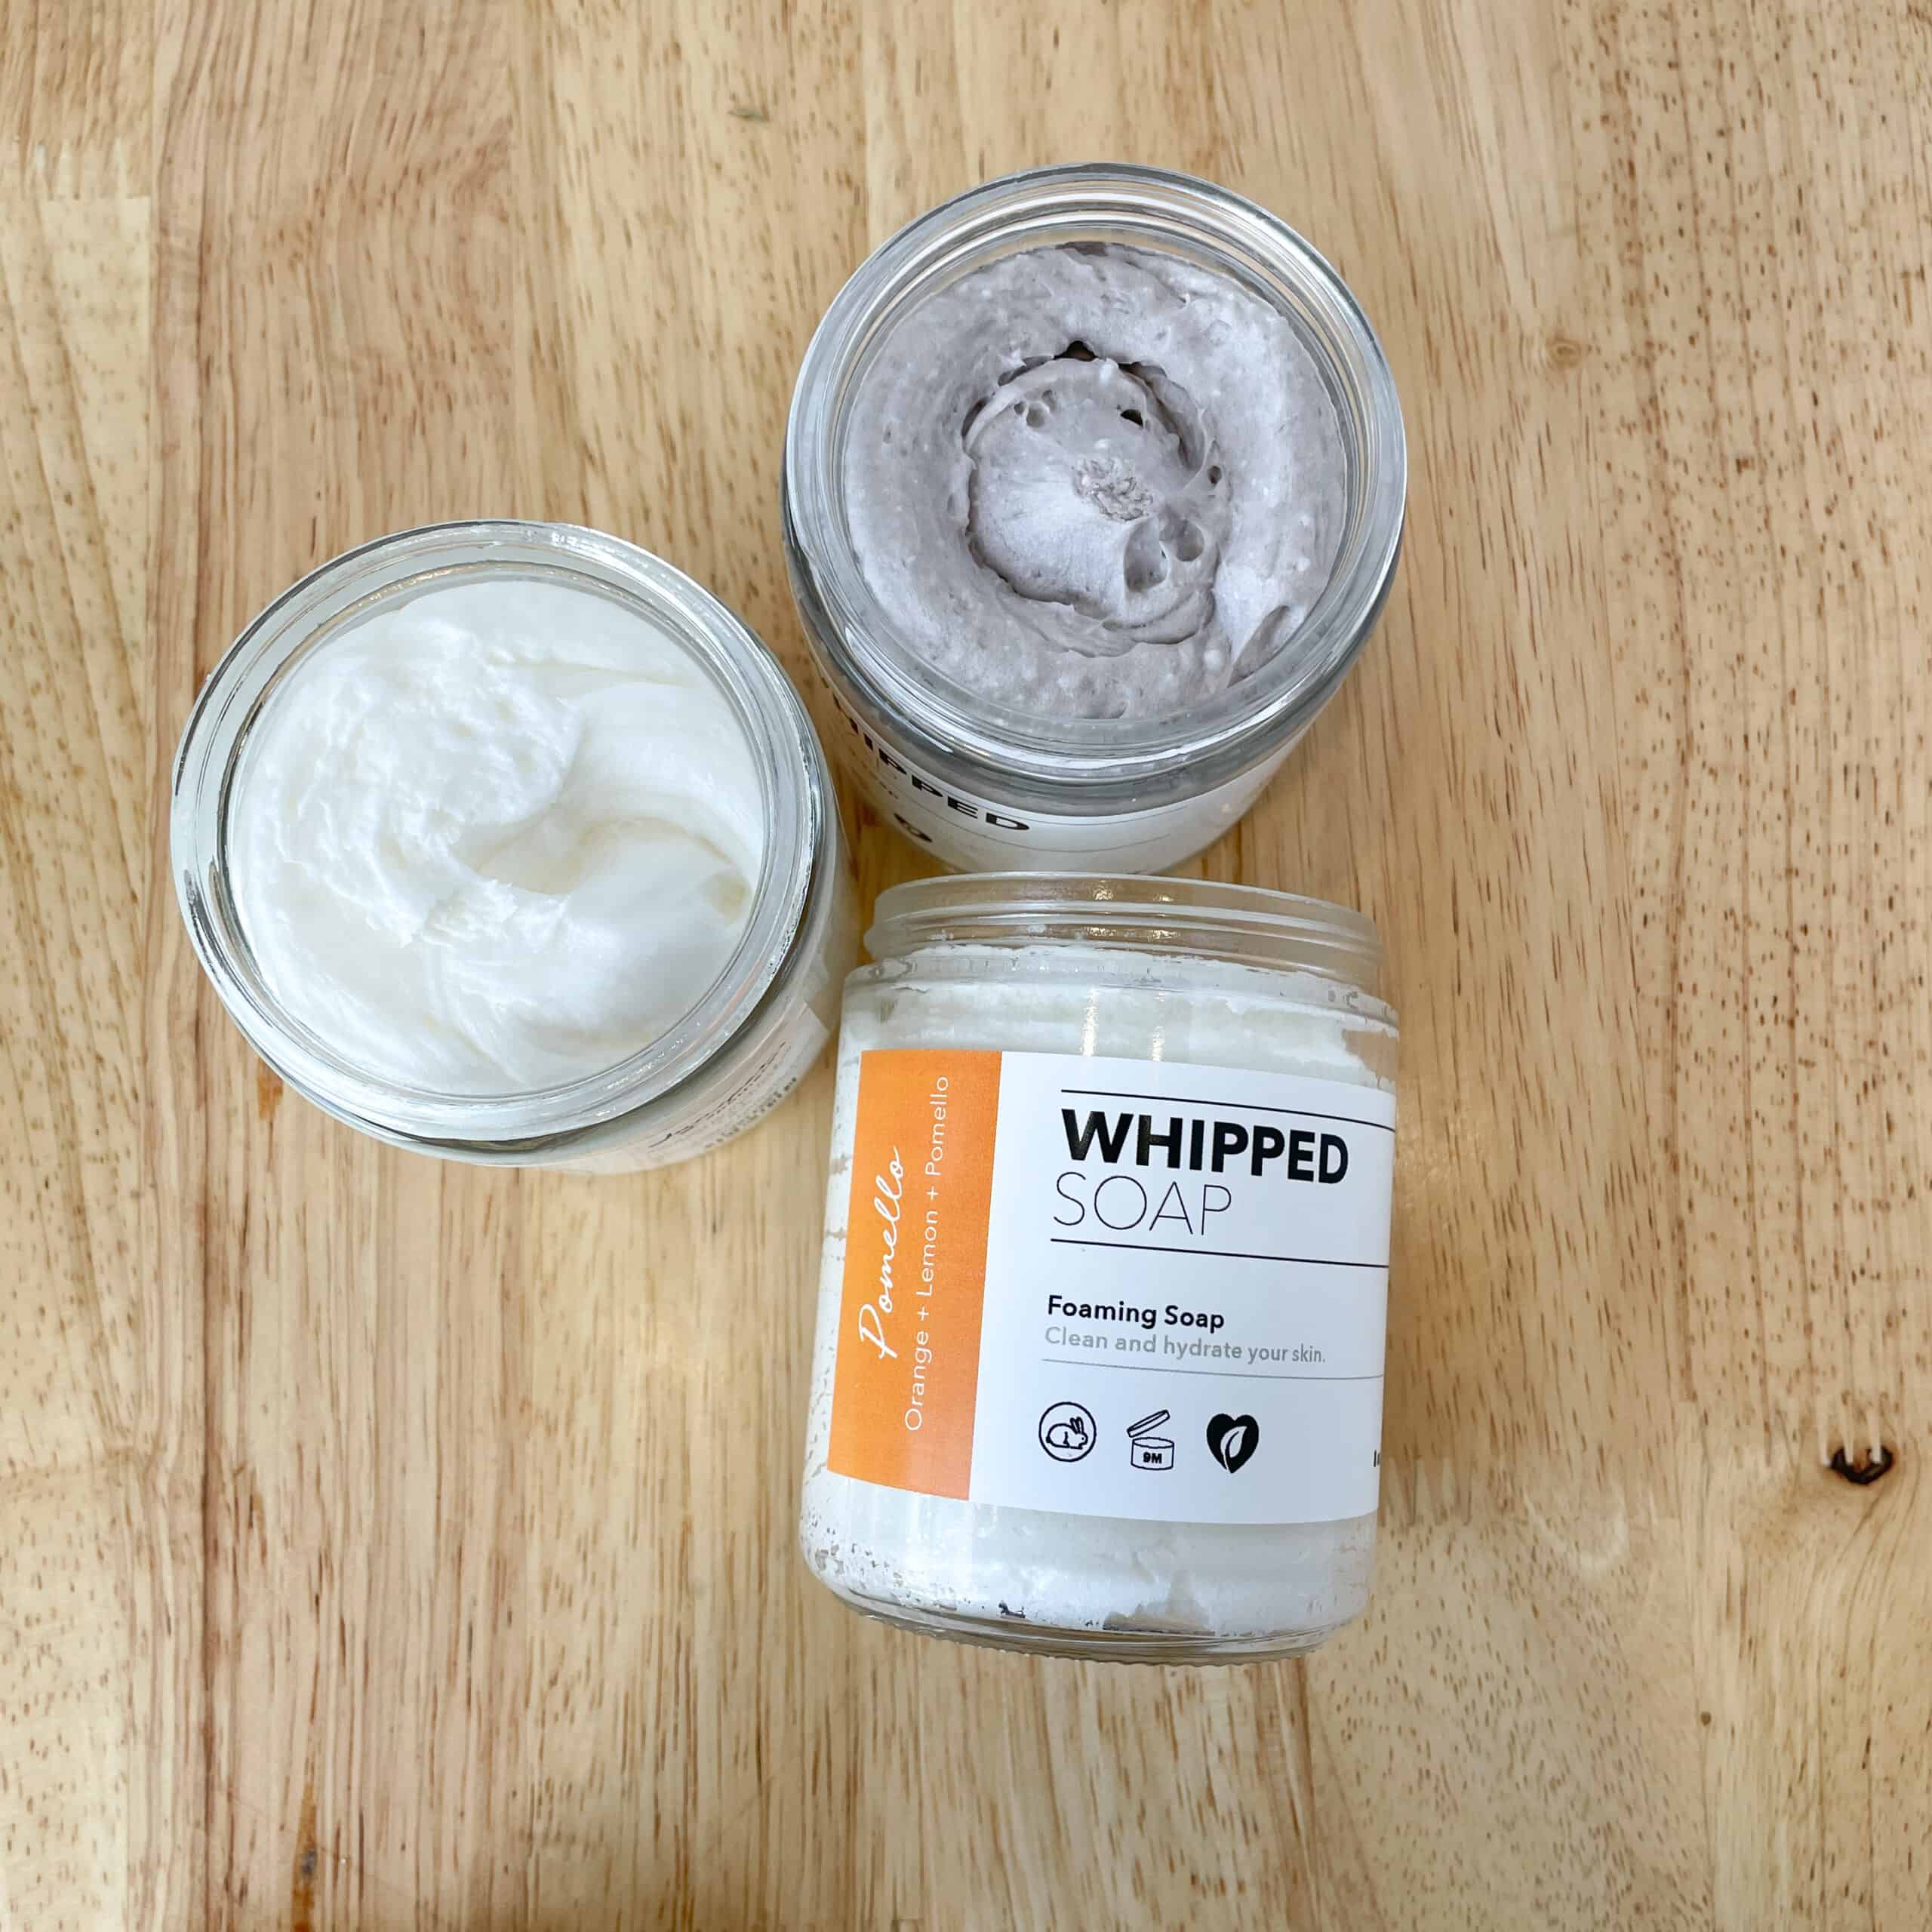 Foaming Bath Butter Base Whipped - Whipped Soap - 1lb Jar - HalalEveryDay -  Vegan - 100% Pure Premium Quality Scrub Skin Body Shower Shave Wash Bath -  Imported Products from USA - iBhejo